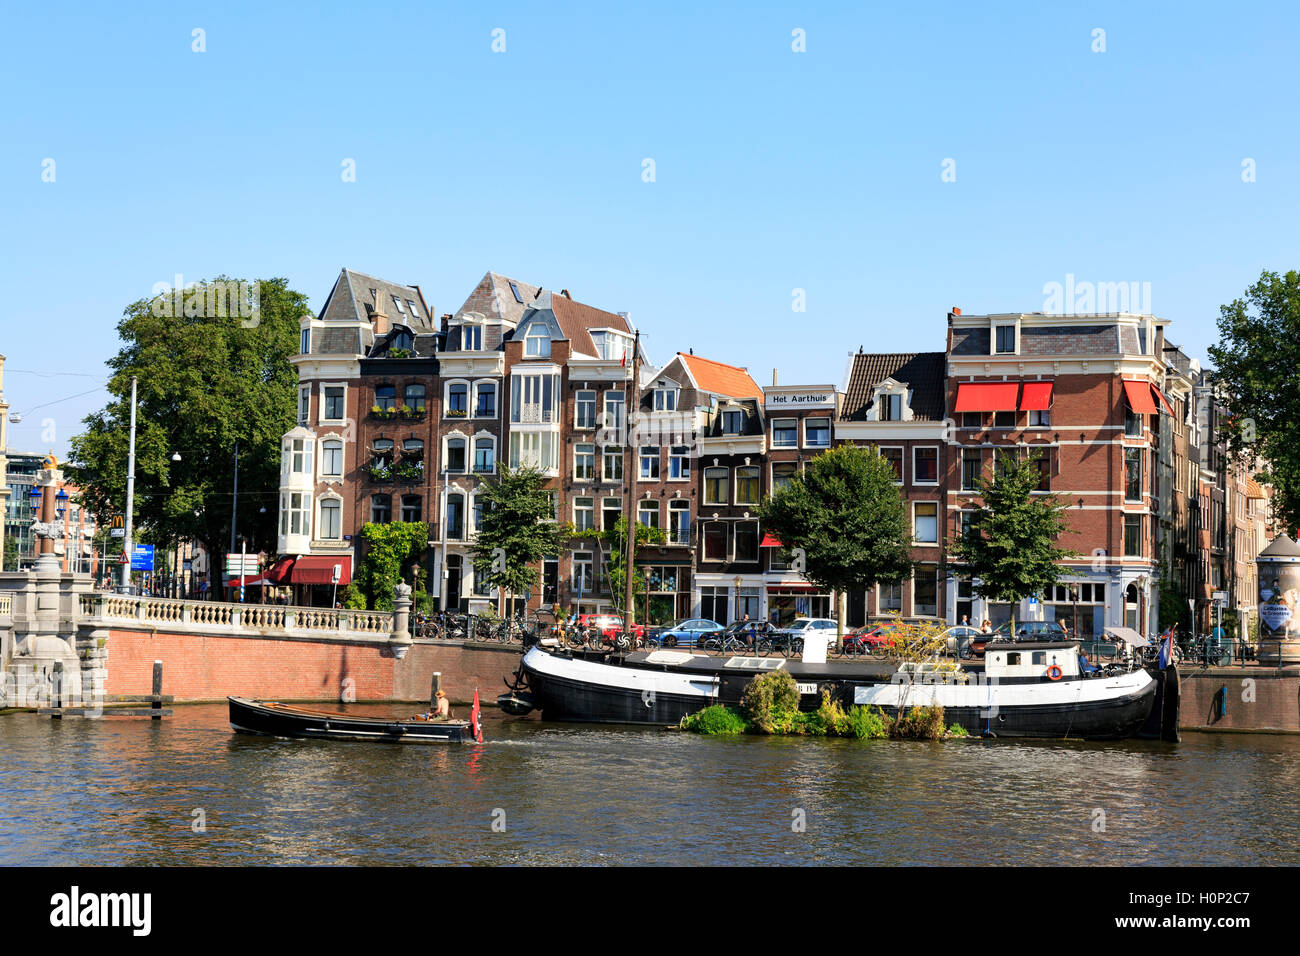 General view of houseboats alongside the canal in Amsterdam Stock Photo